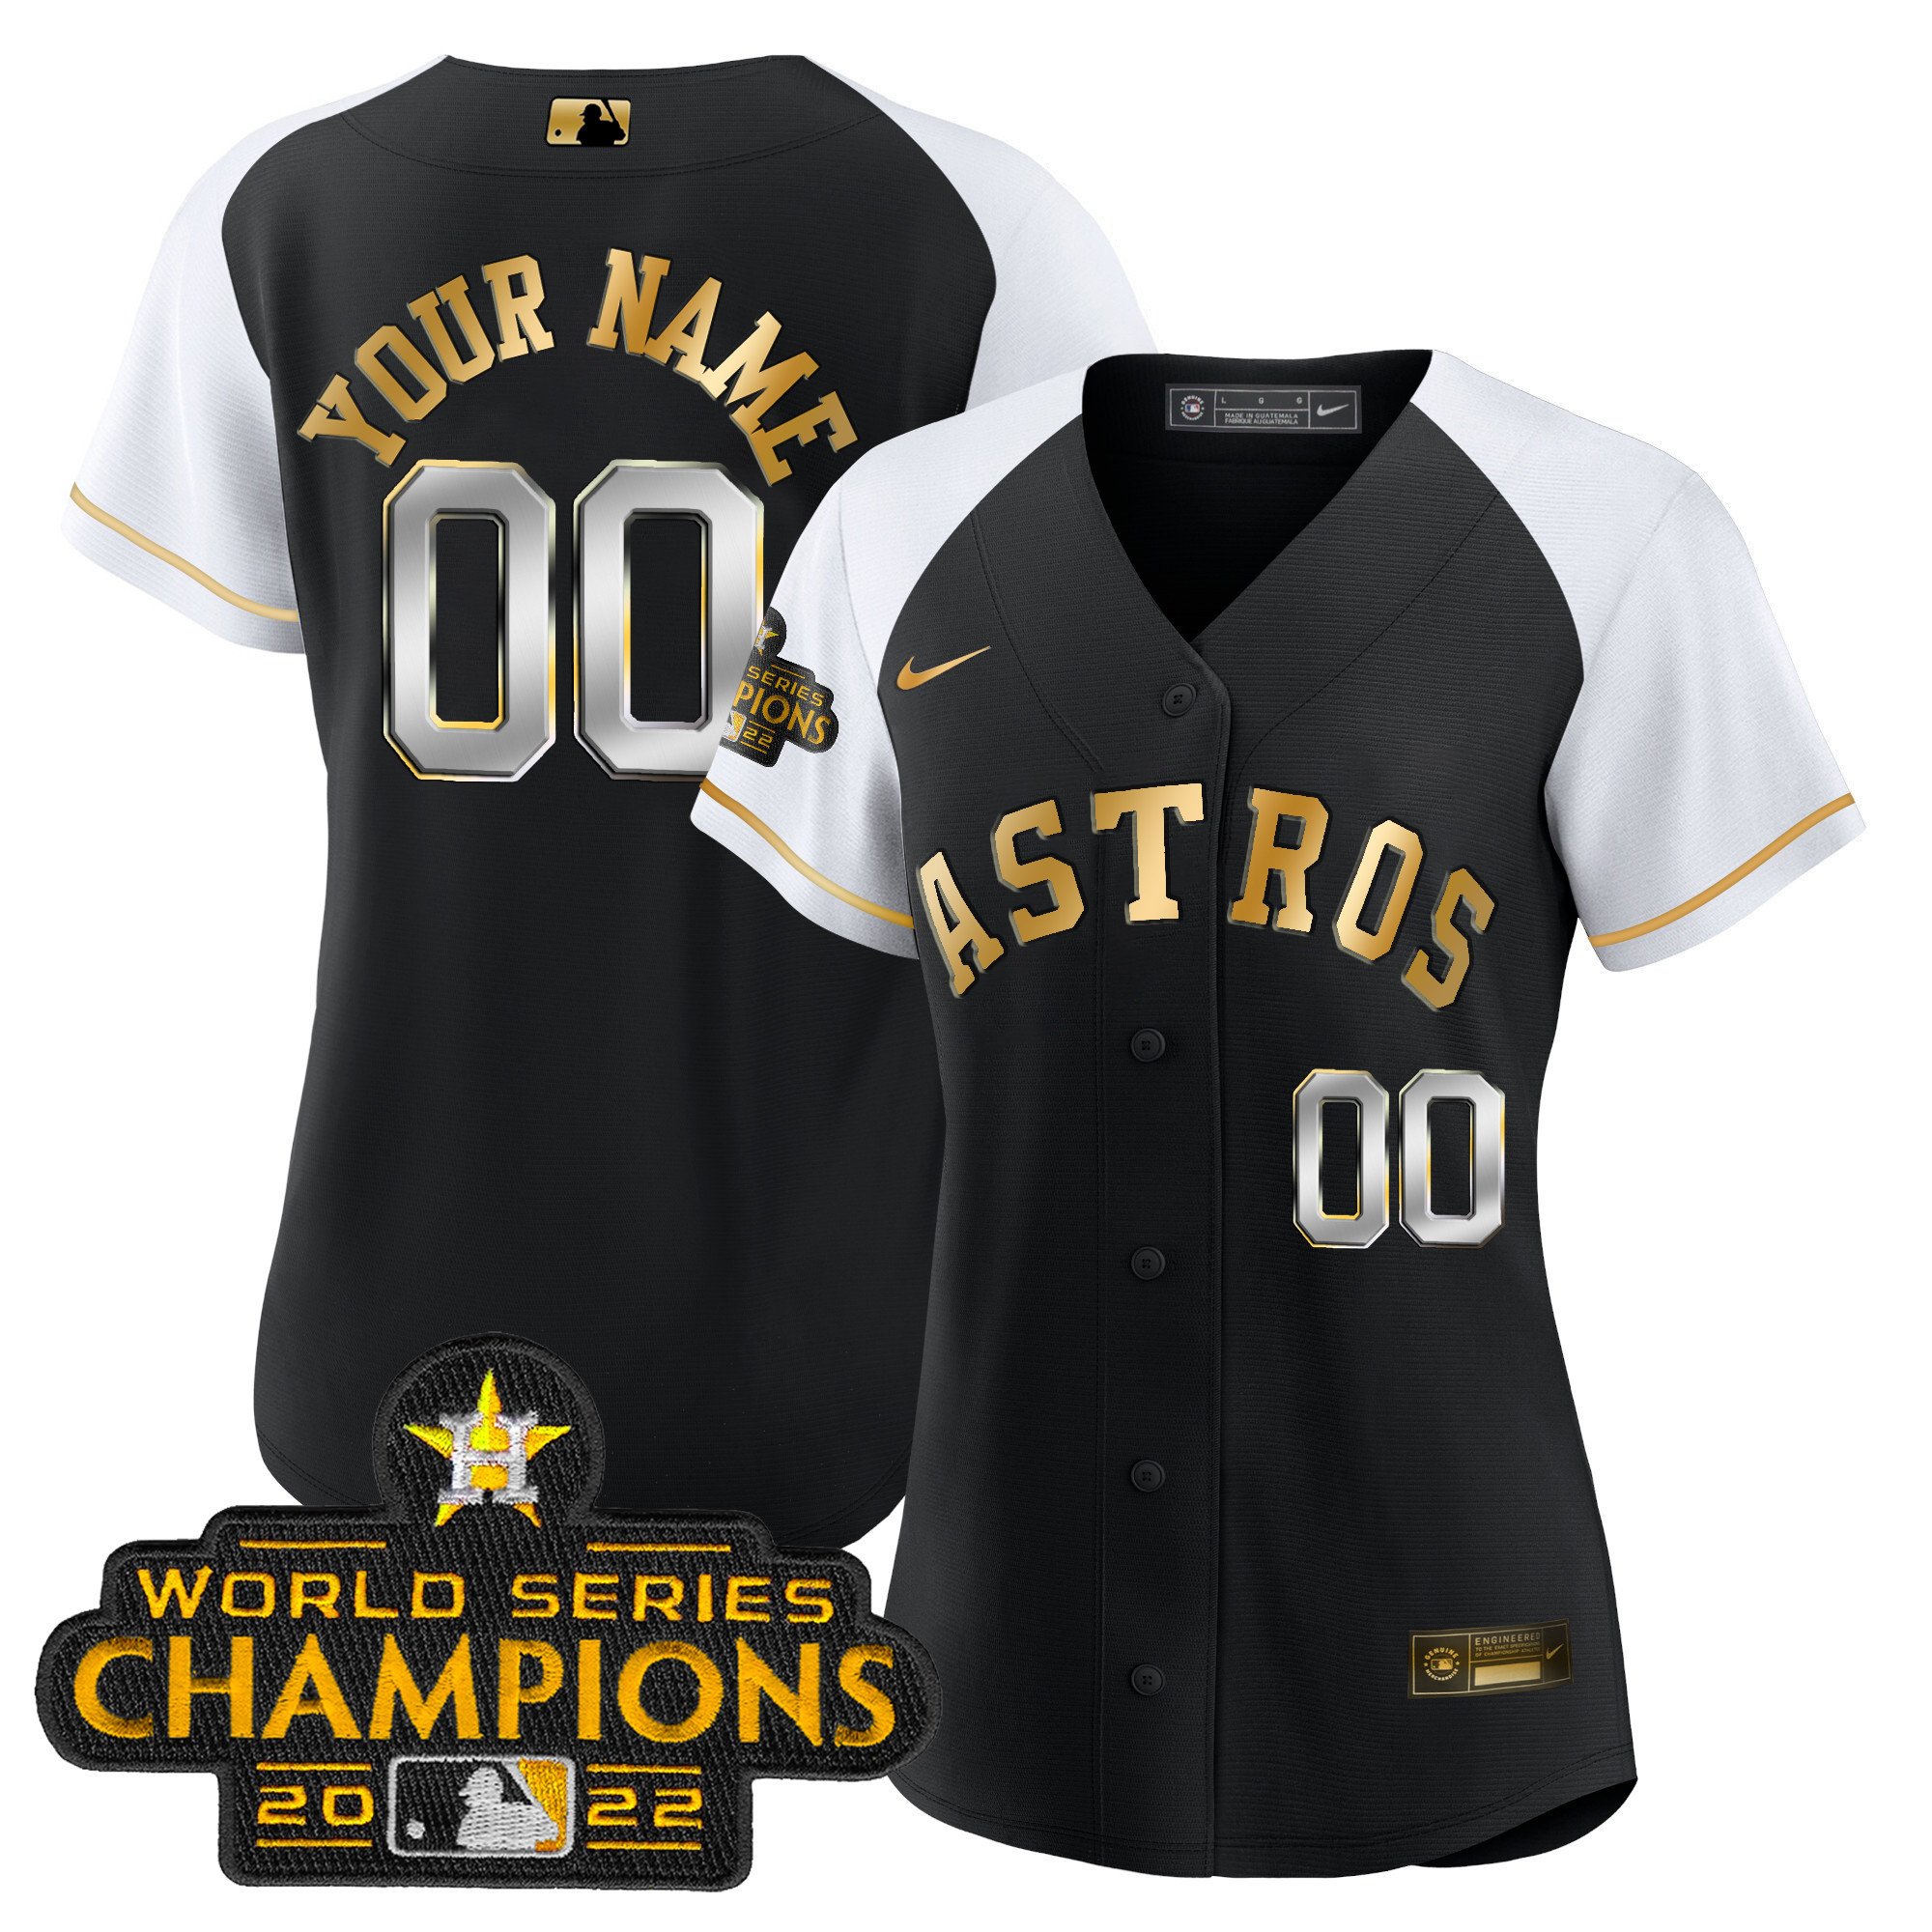 Men's Astros 2023 Champions Gold Split Jersey – All Stitched - Vgear